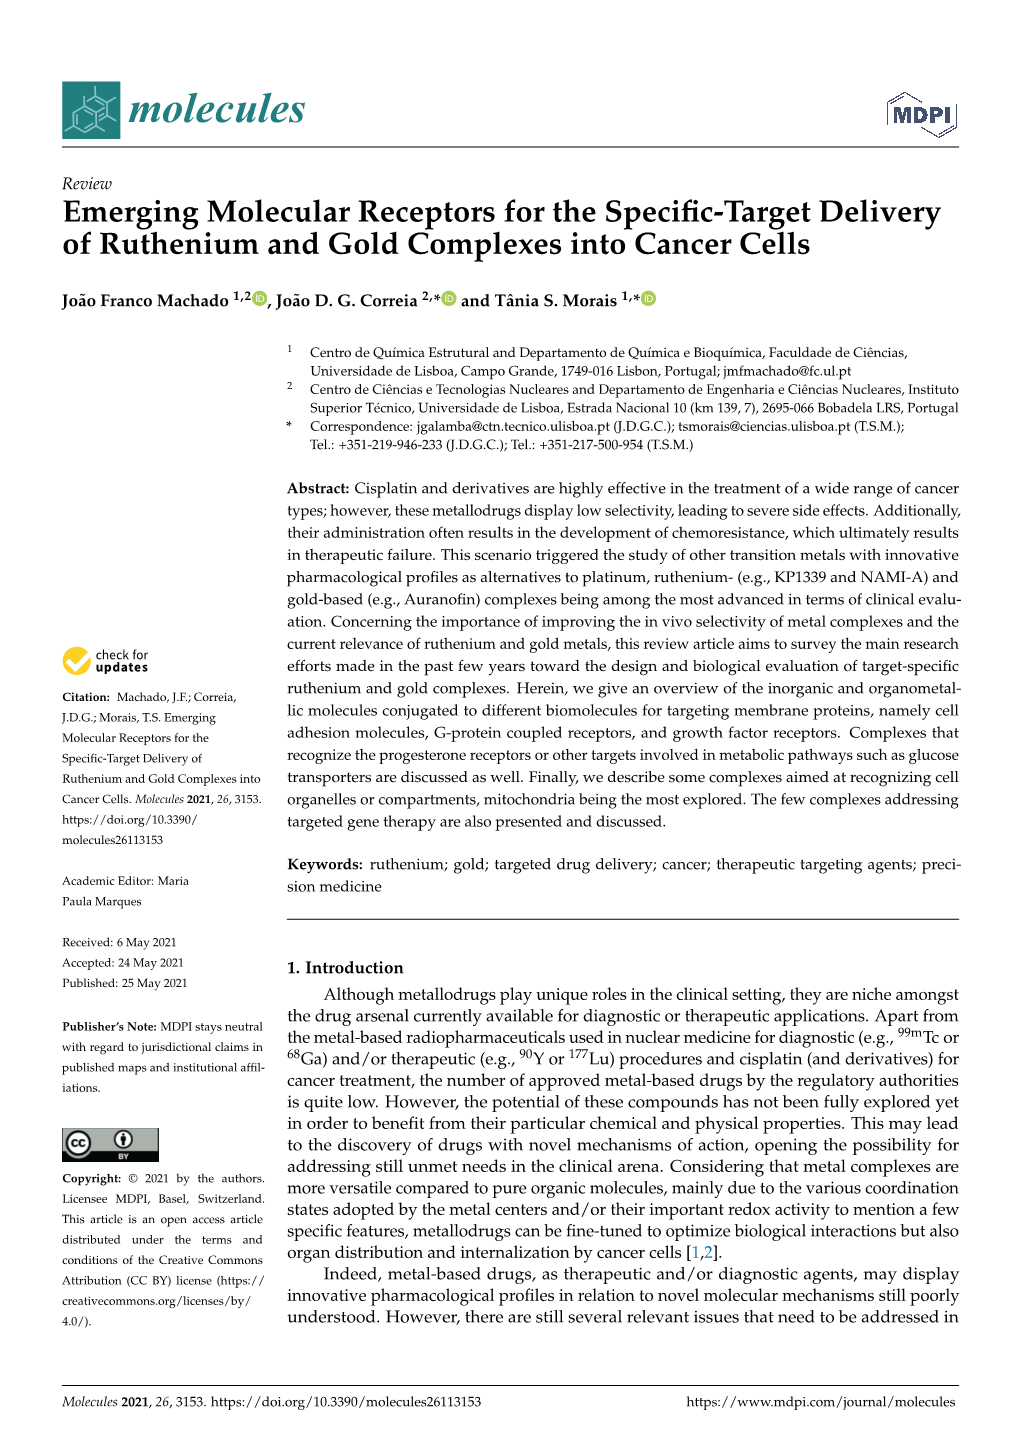 Emerging Molecular Receptors for the Specific-Target Delivery of Ruthenium and Gold Complexes Into Cancer Cells